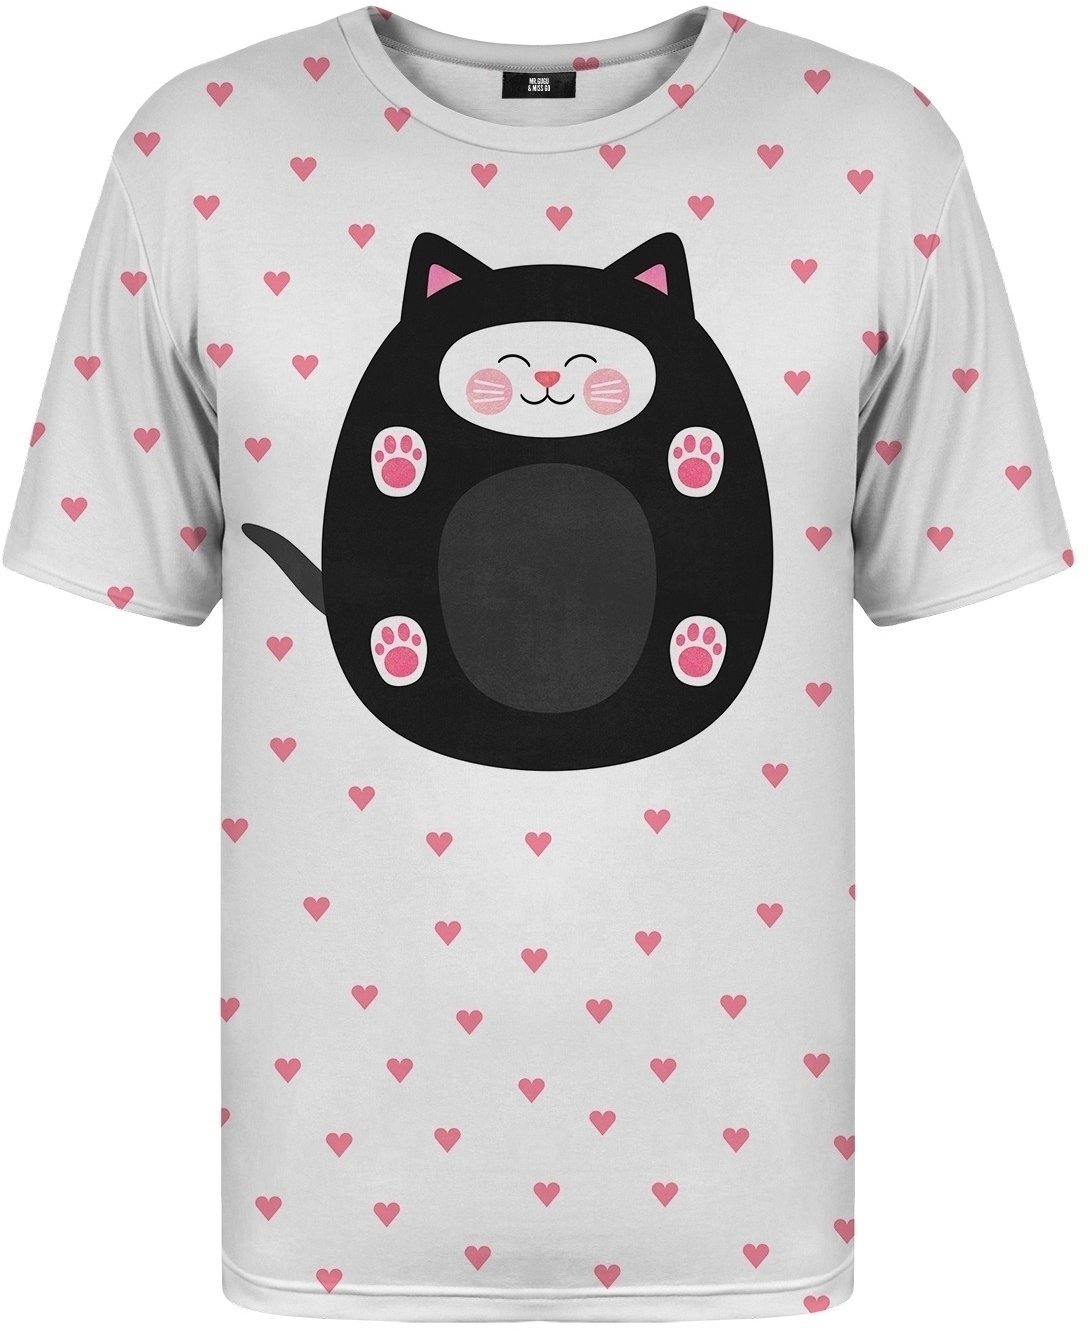 Ing Mr. Gugu and Miss Go Soft Kitty T-Shirt S